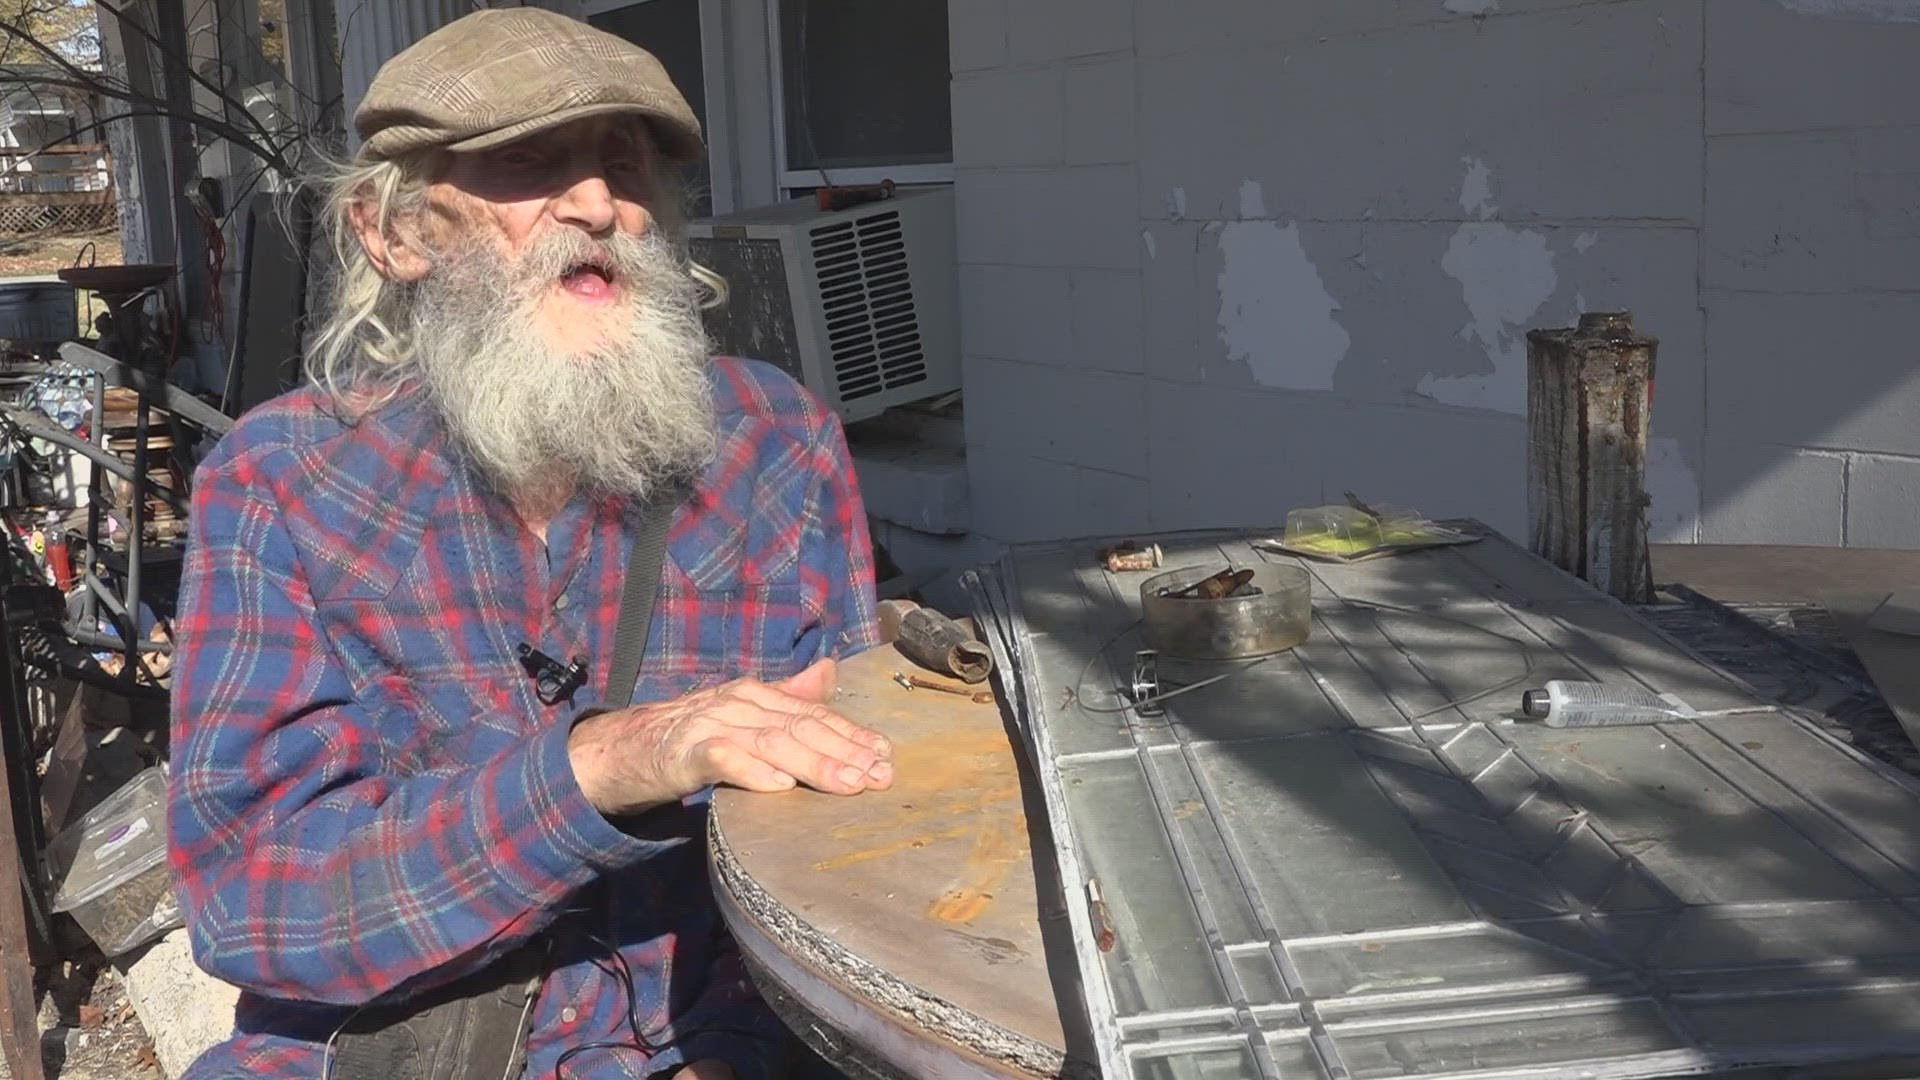 Ninety-year-old Jack Sophir has been collecting antiques his whole life. However, when he started moving his collection into town, multiple people filed complaints.